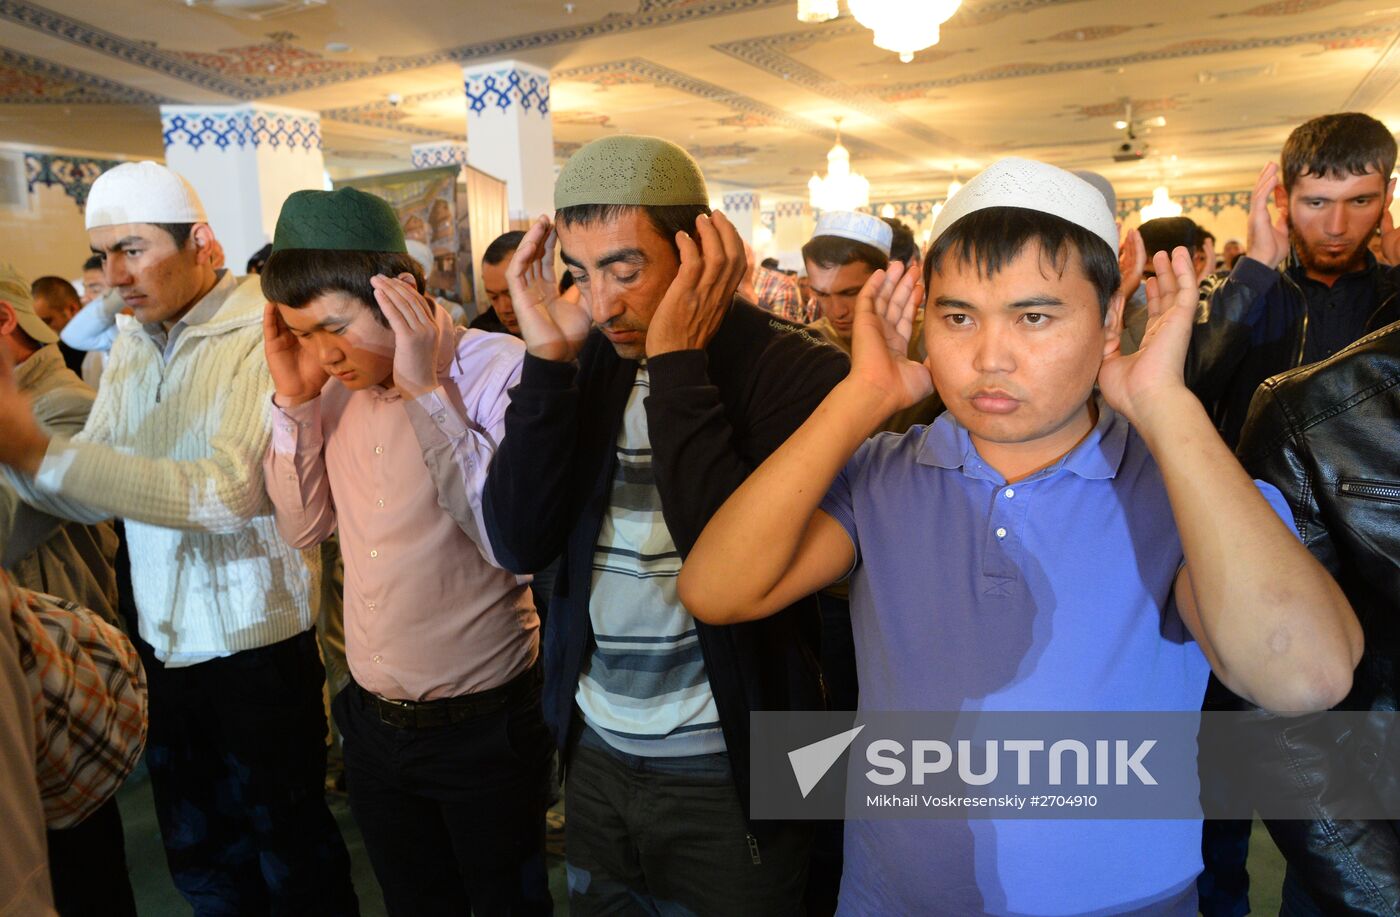 Celebrating Eid al-Adha at Moscow Cathedral Mosque